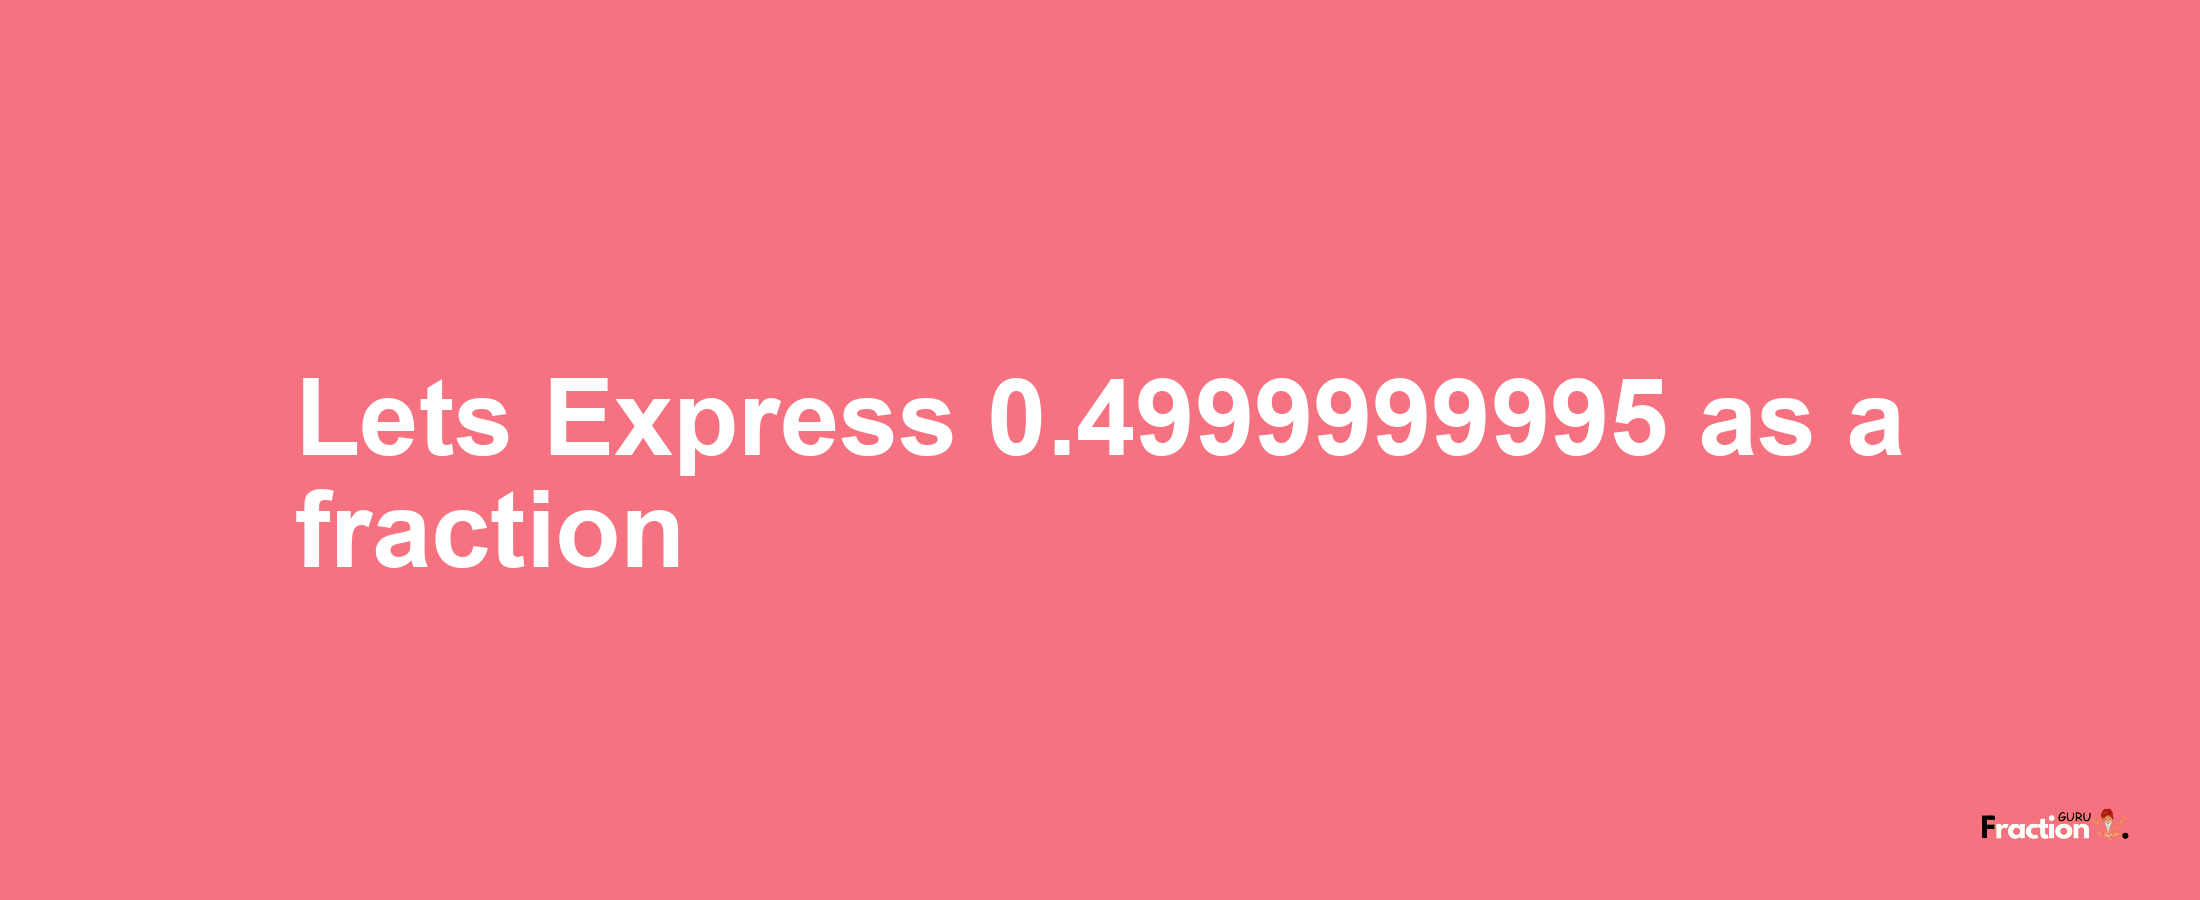 Lets Express 0.4999999995 as afraction